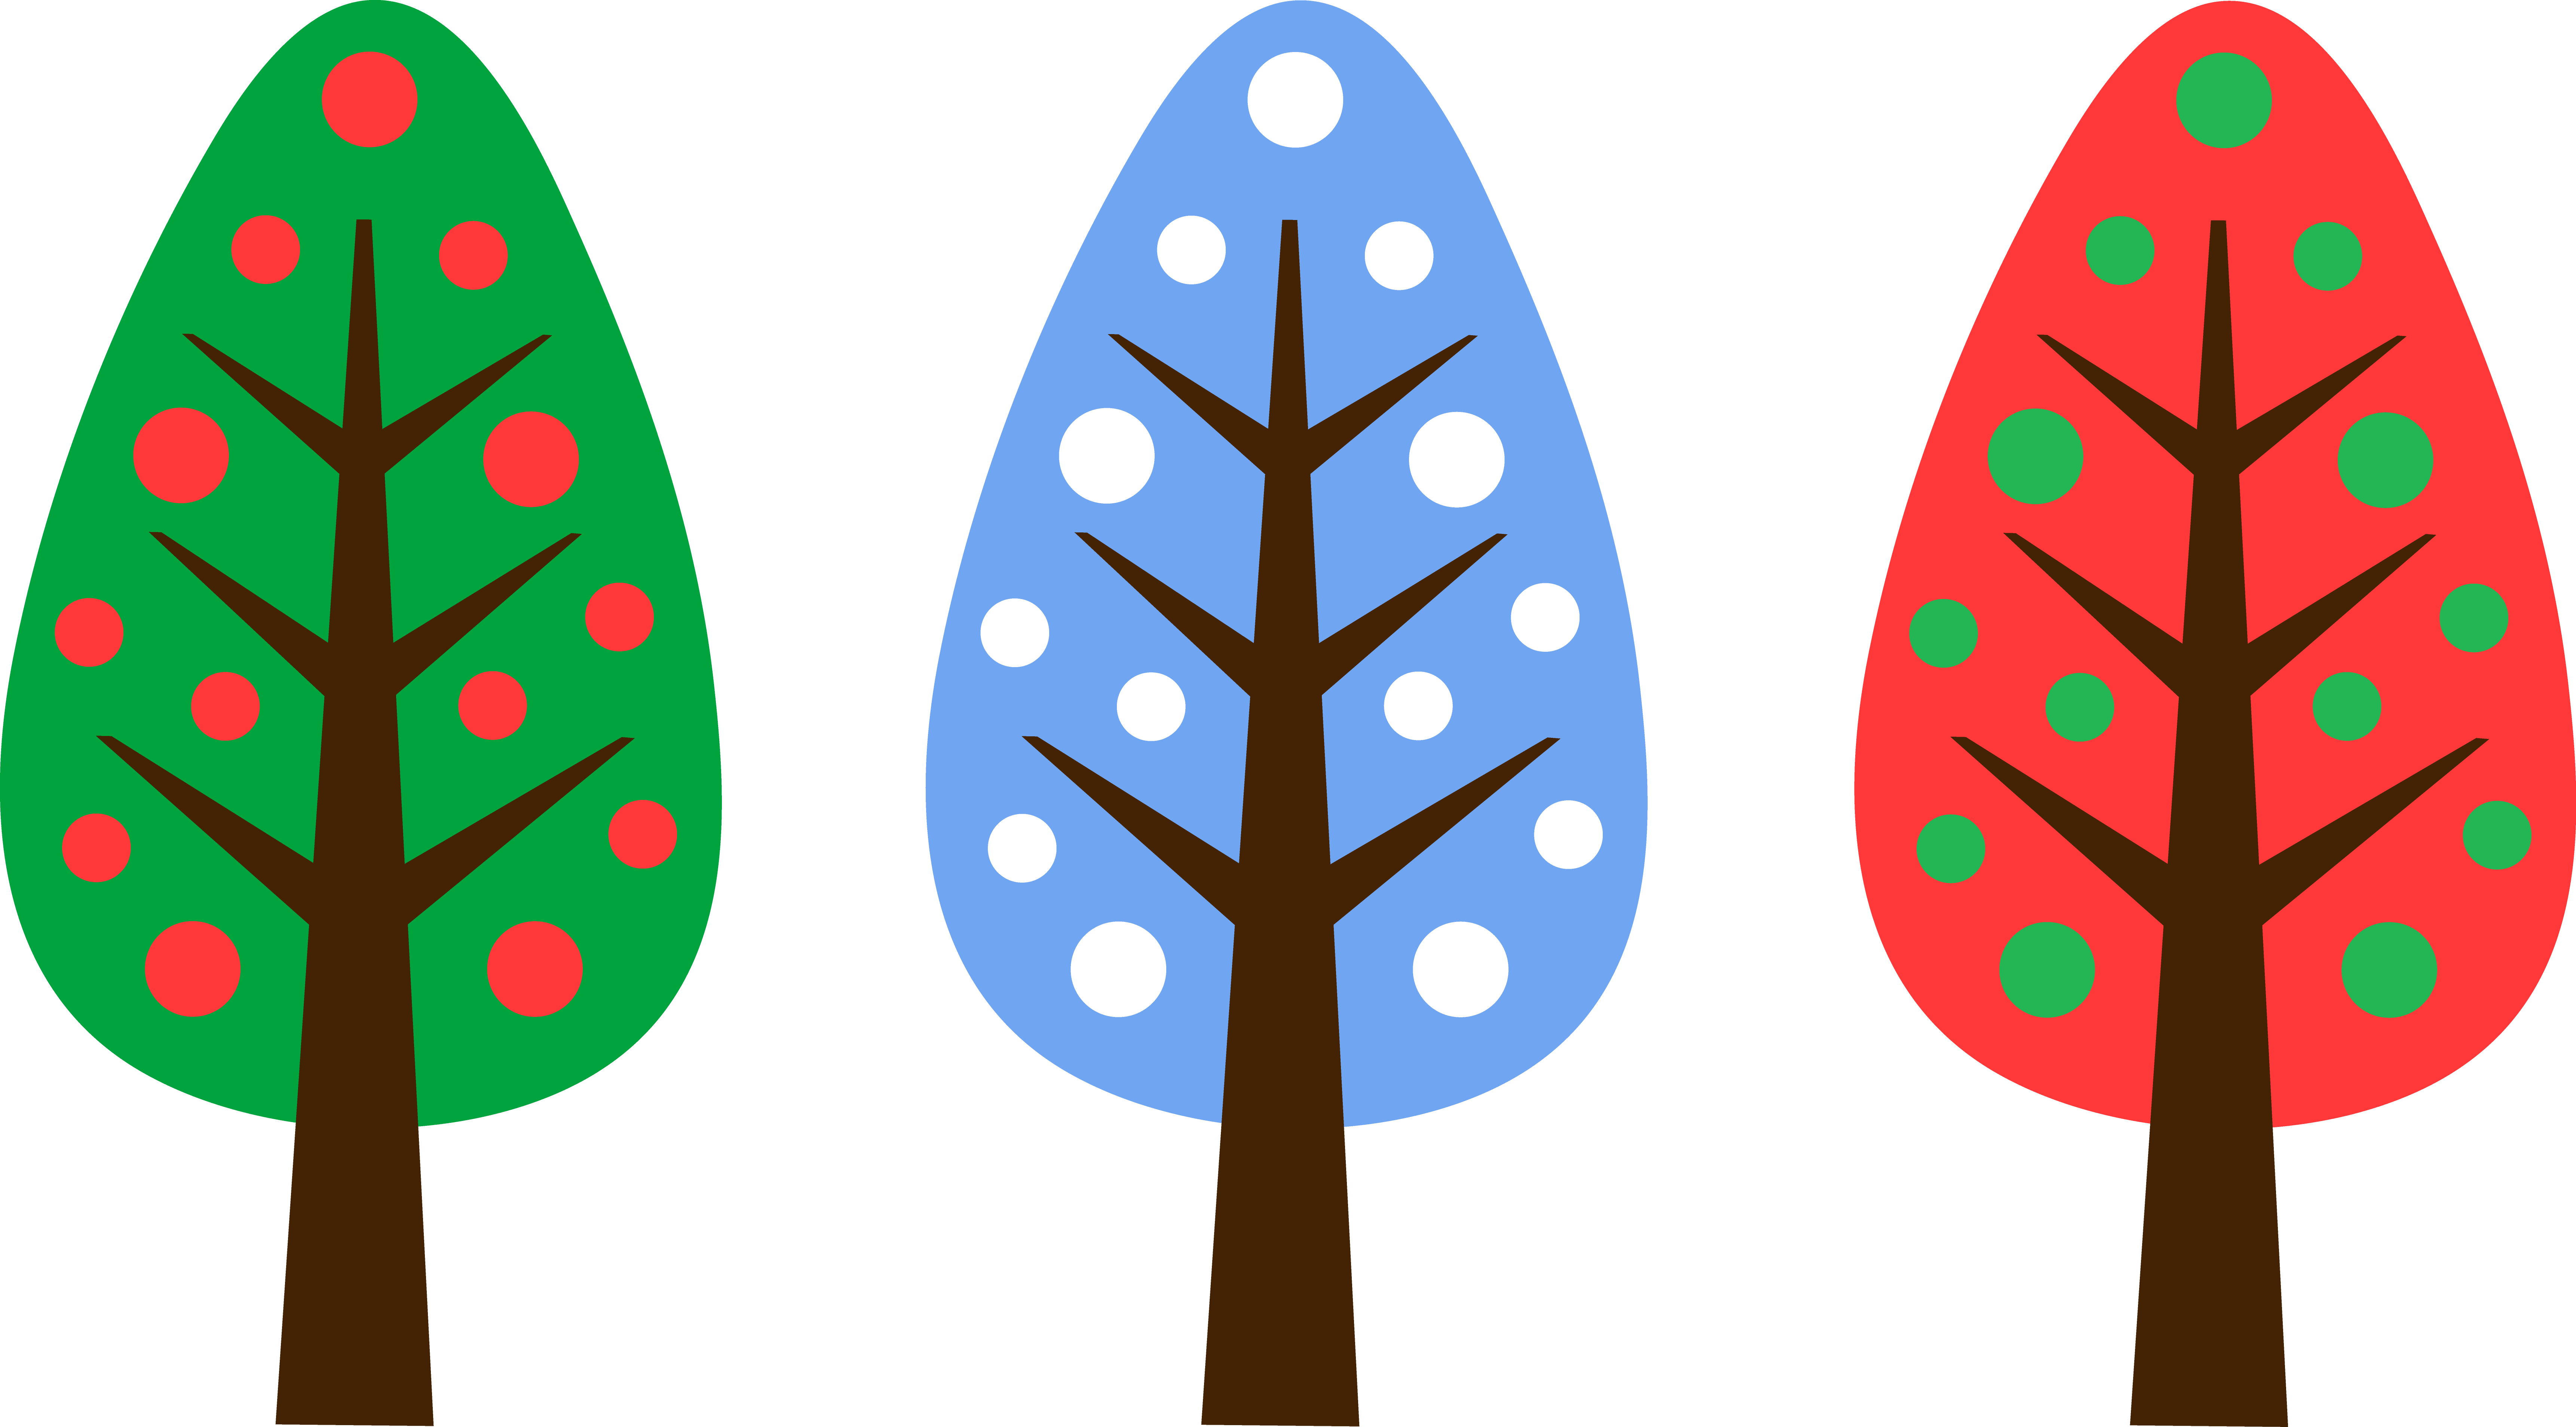 A Group Of Trees With Different Colors